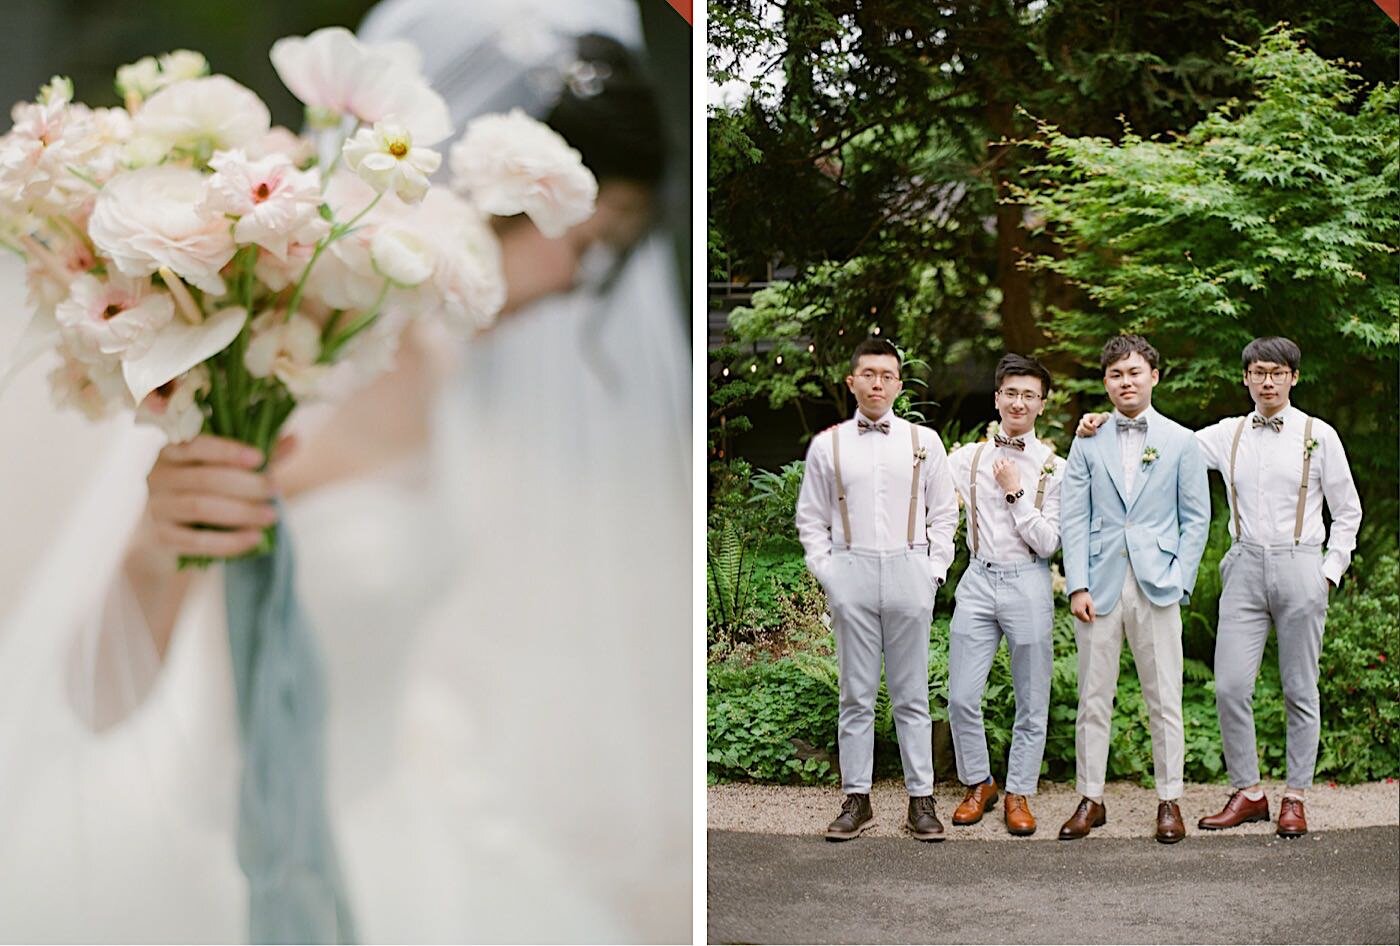 Bridal party details at a pastel Woodinville wedding